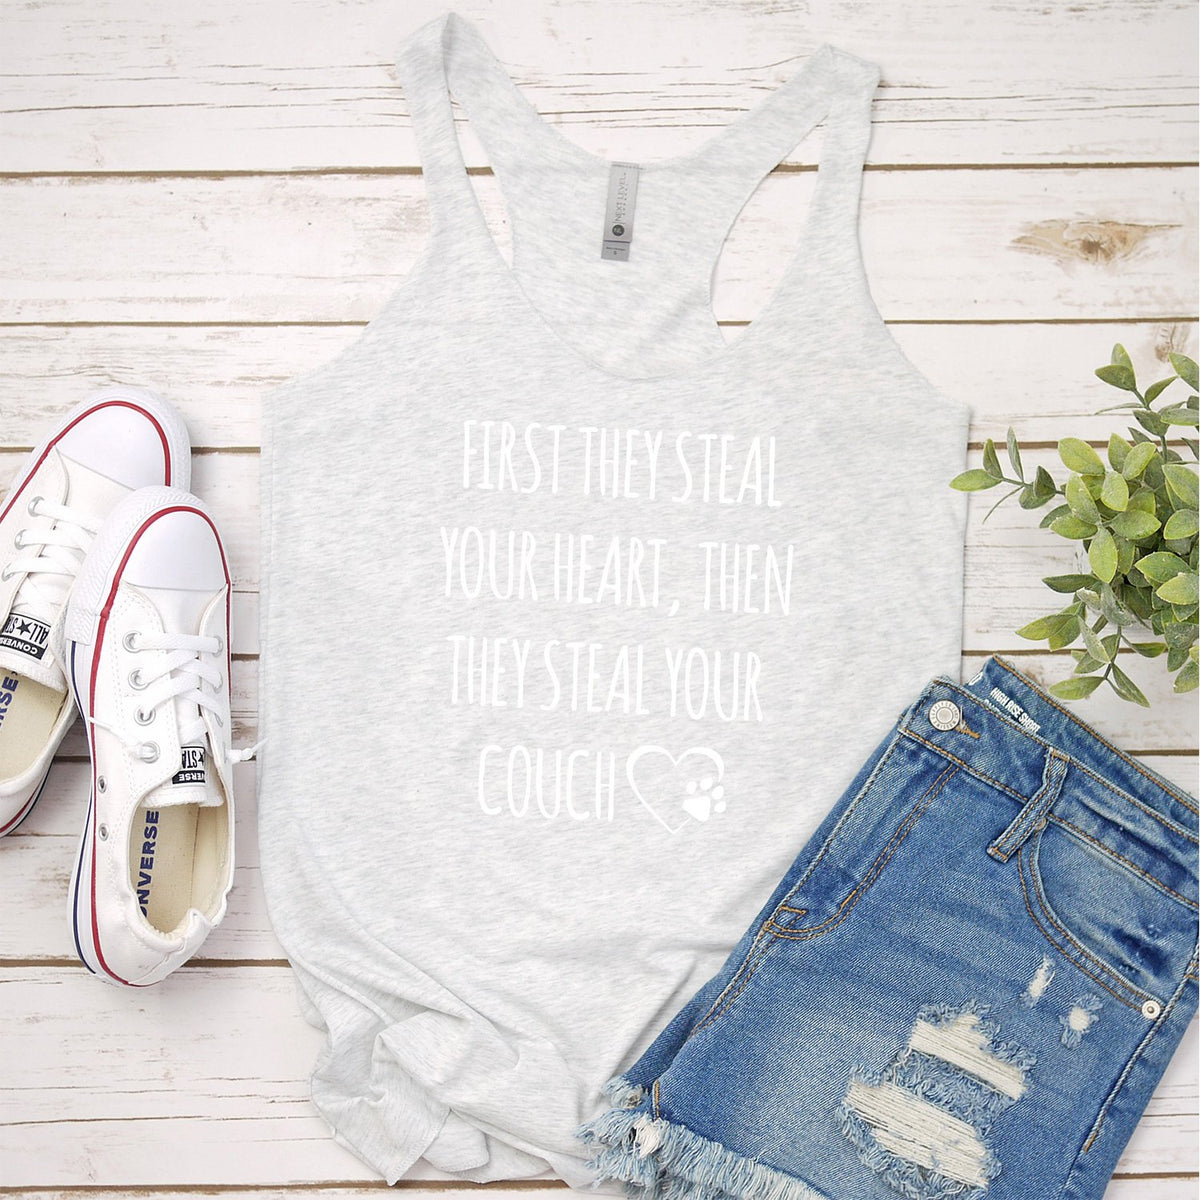 First They Steal Your Heart, Then They Steal Your Couch - Tank Top Racerback